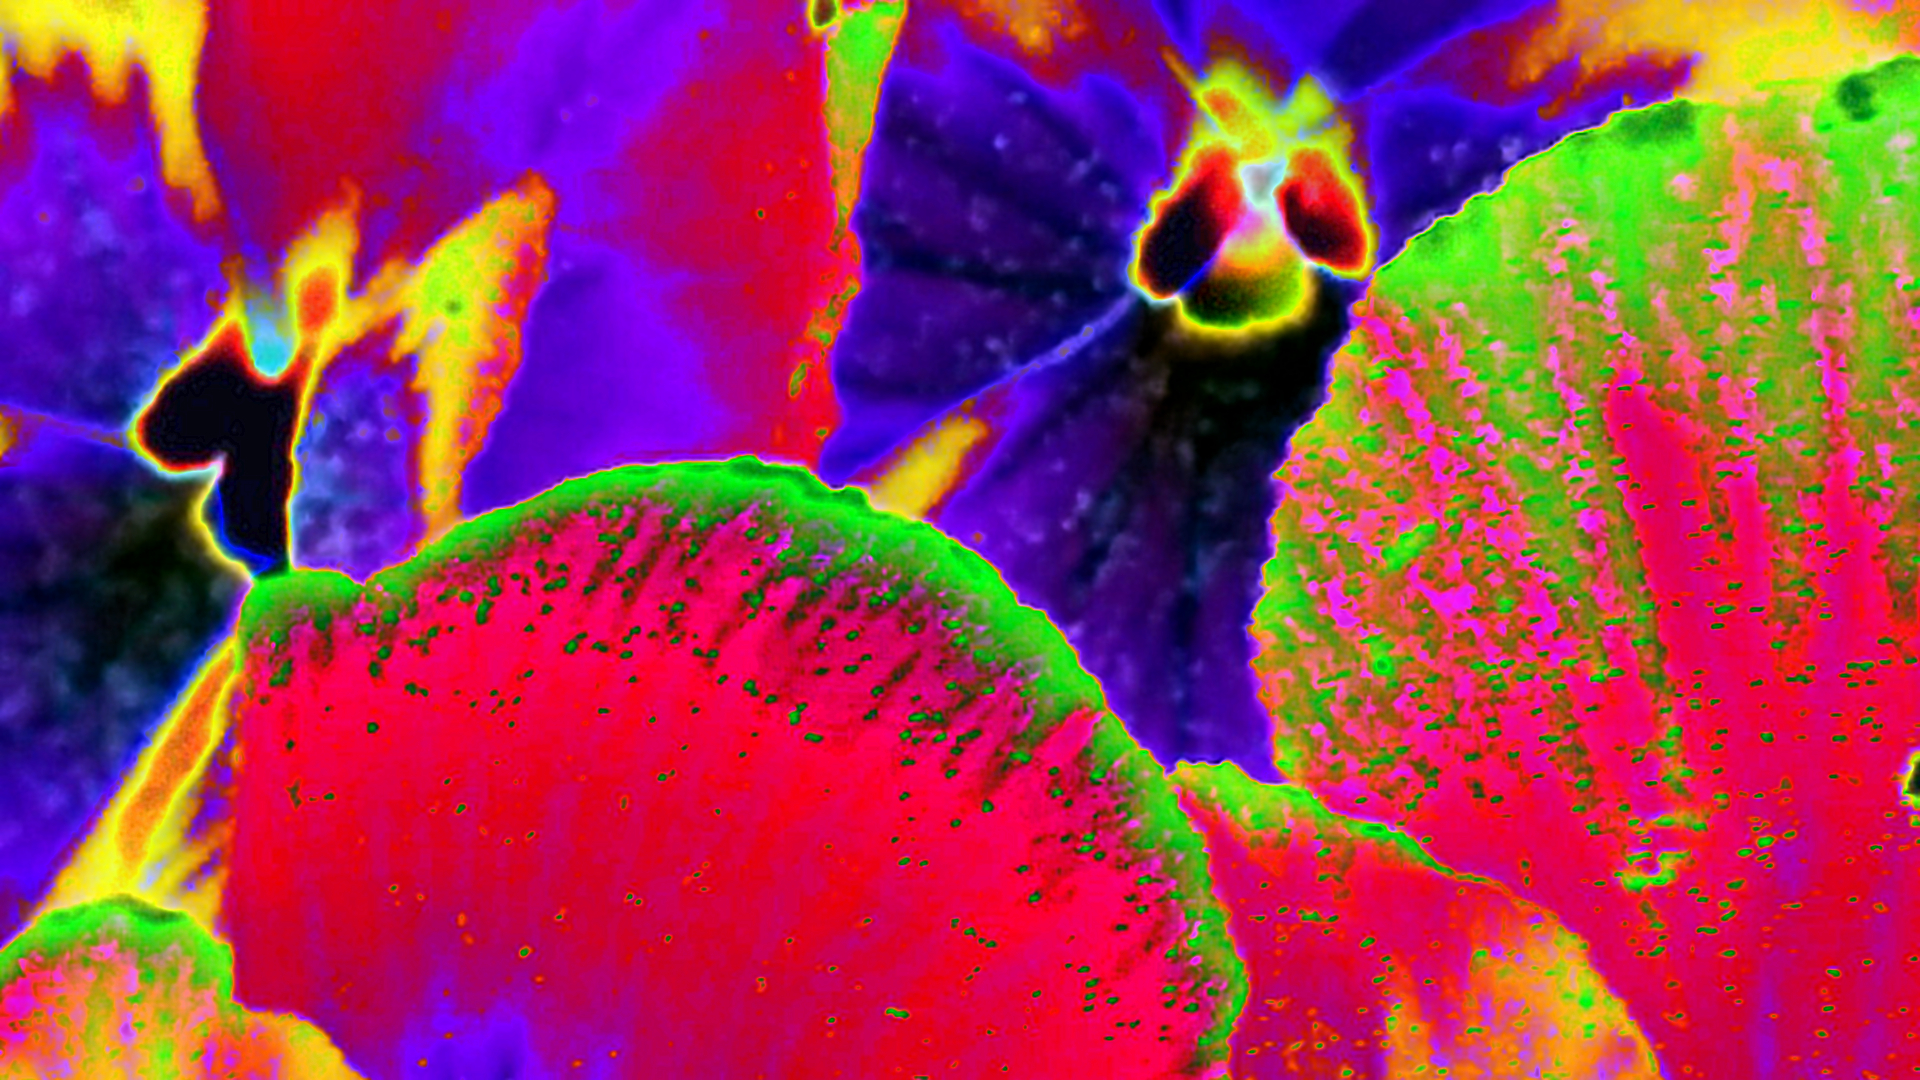 Macro of purple pansies in soft focus, manipulated to represent the intense burn of desire. This is the second of two treatments of the original image. The outer parts of the petals in the foreground are bright orange with bright green flourishes. In the background are two blazing yellow and red centers, each surrounded by dark purple inner parts of petals that appear to be in red flames. The bright yellow between and around the flowers is meant to suggest a burning fire.